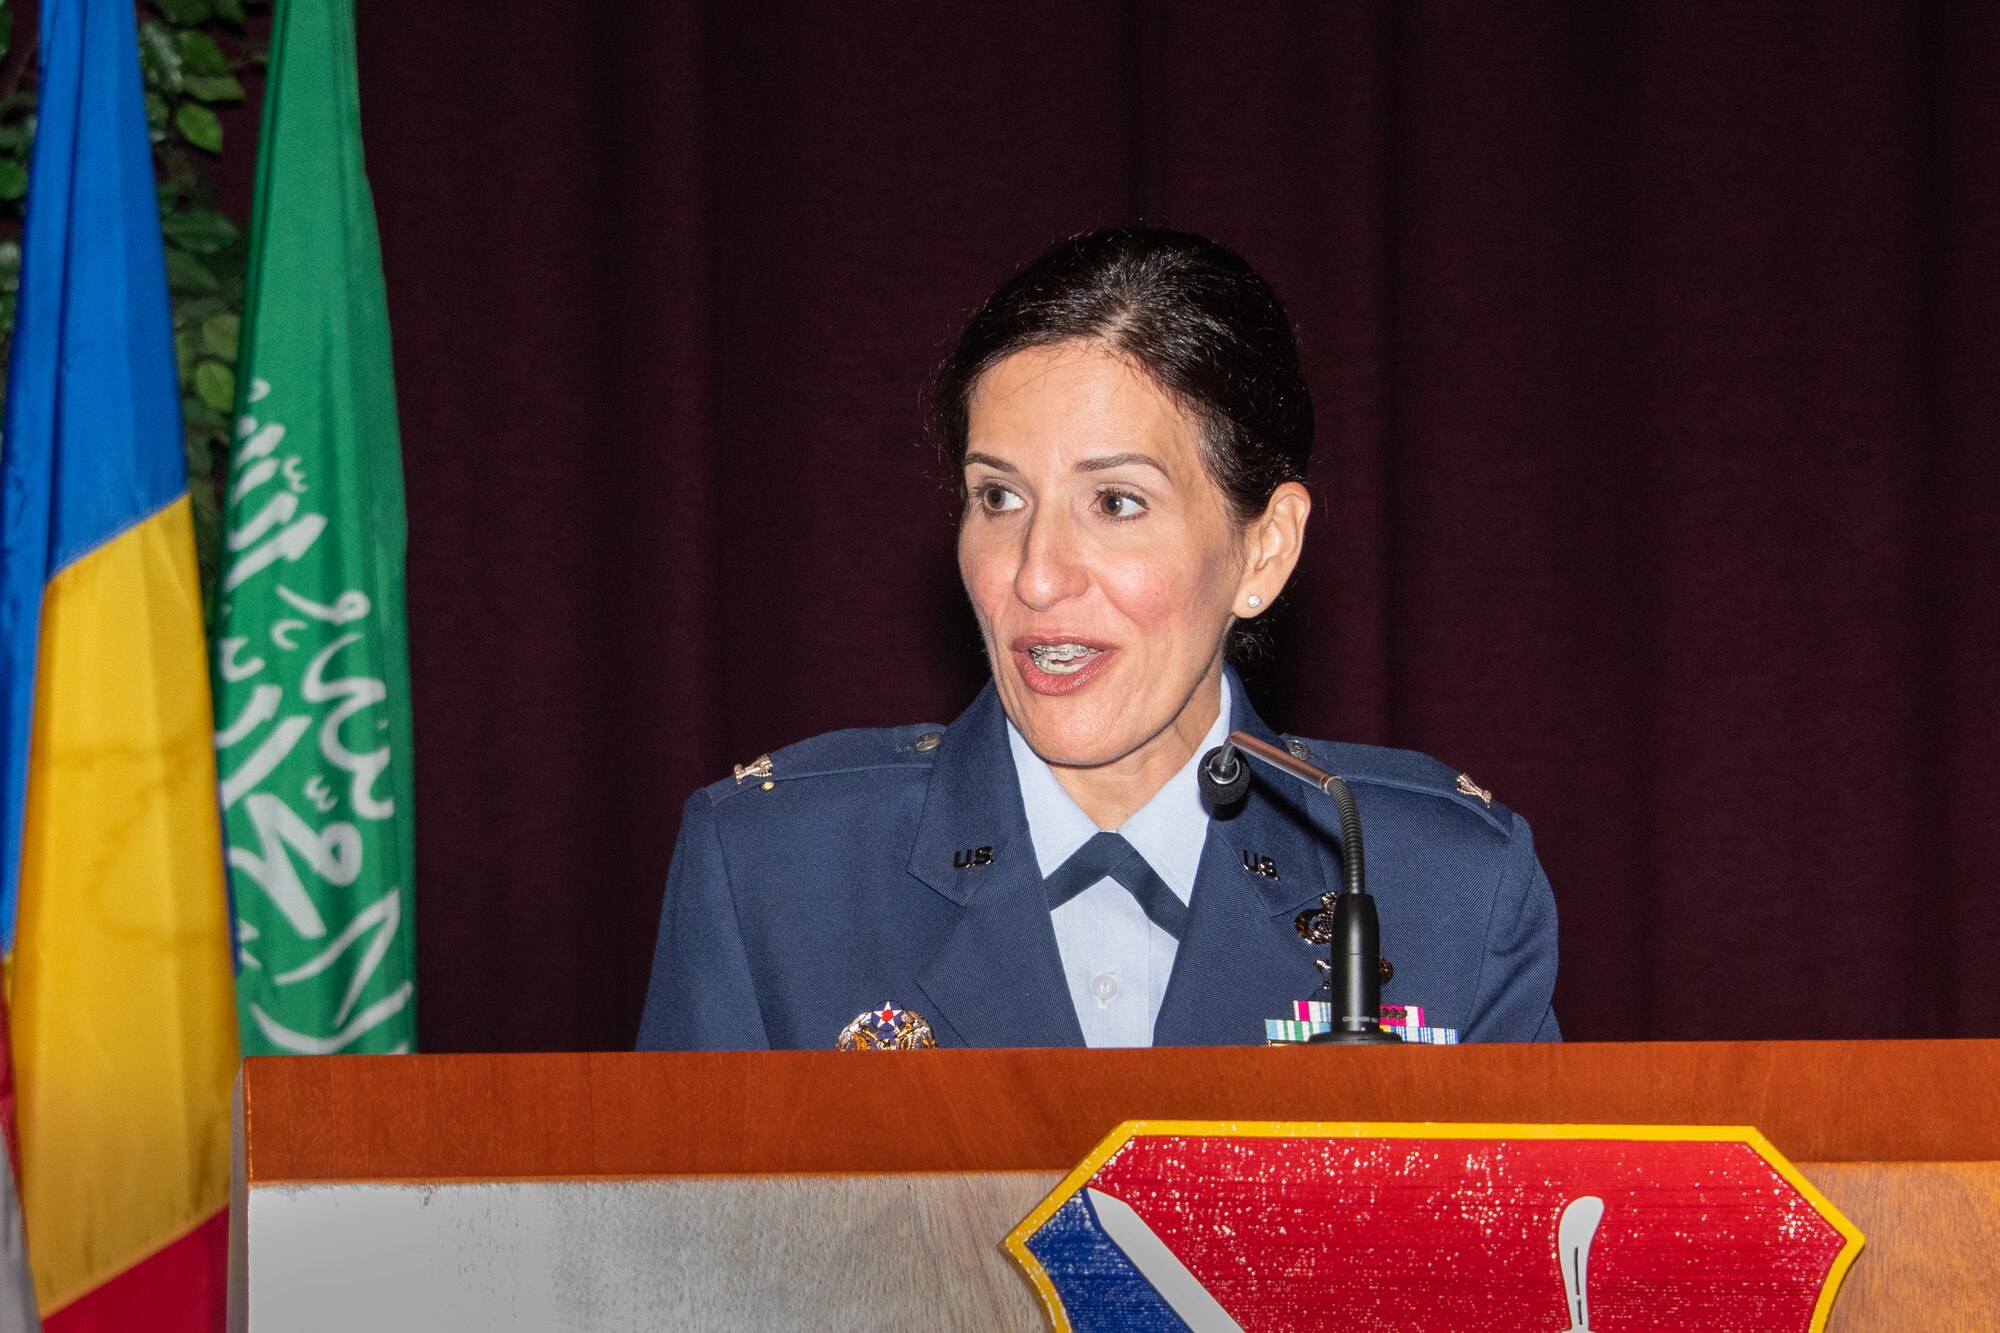 Col. Kathryn A. Brown, Barnes Center for Enlisted Education commander, speaks to a crowd at her assumption of command ceremony July 11, 2019, at the Air Force Senior Noncommissioned Officer Academy Auditorium, Gunter Annex, Alabama. The organizations and programs under the Barnes Center umbrella include Airman Leadership Schools, NCO Academy (stateside), Senior NCO Academy, Community College of the Air Force, U.S. Air Force First Sergeant Academy, Air Force Enlisted Heritage Research Institute, Air Force Career Development Academy, Enlisted PME Instructor Course and Chief Master Sergeant Leadership Course.